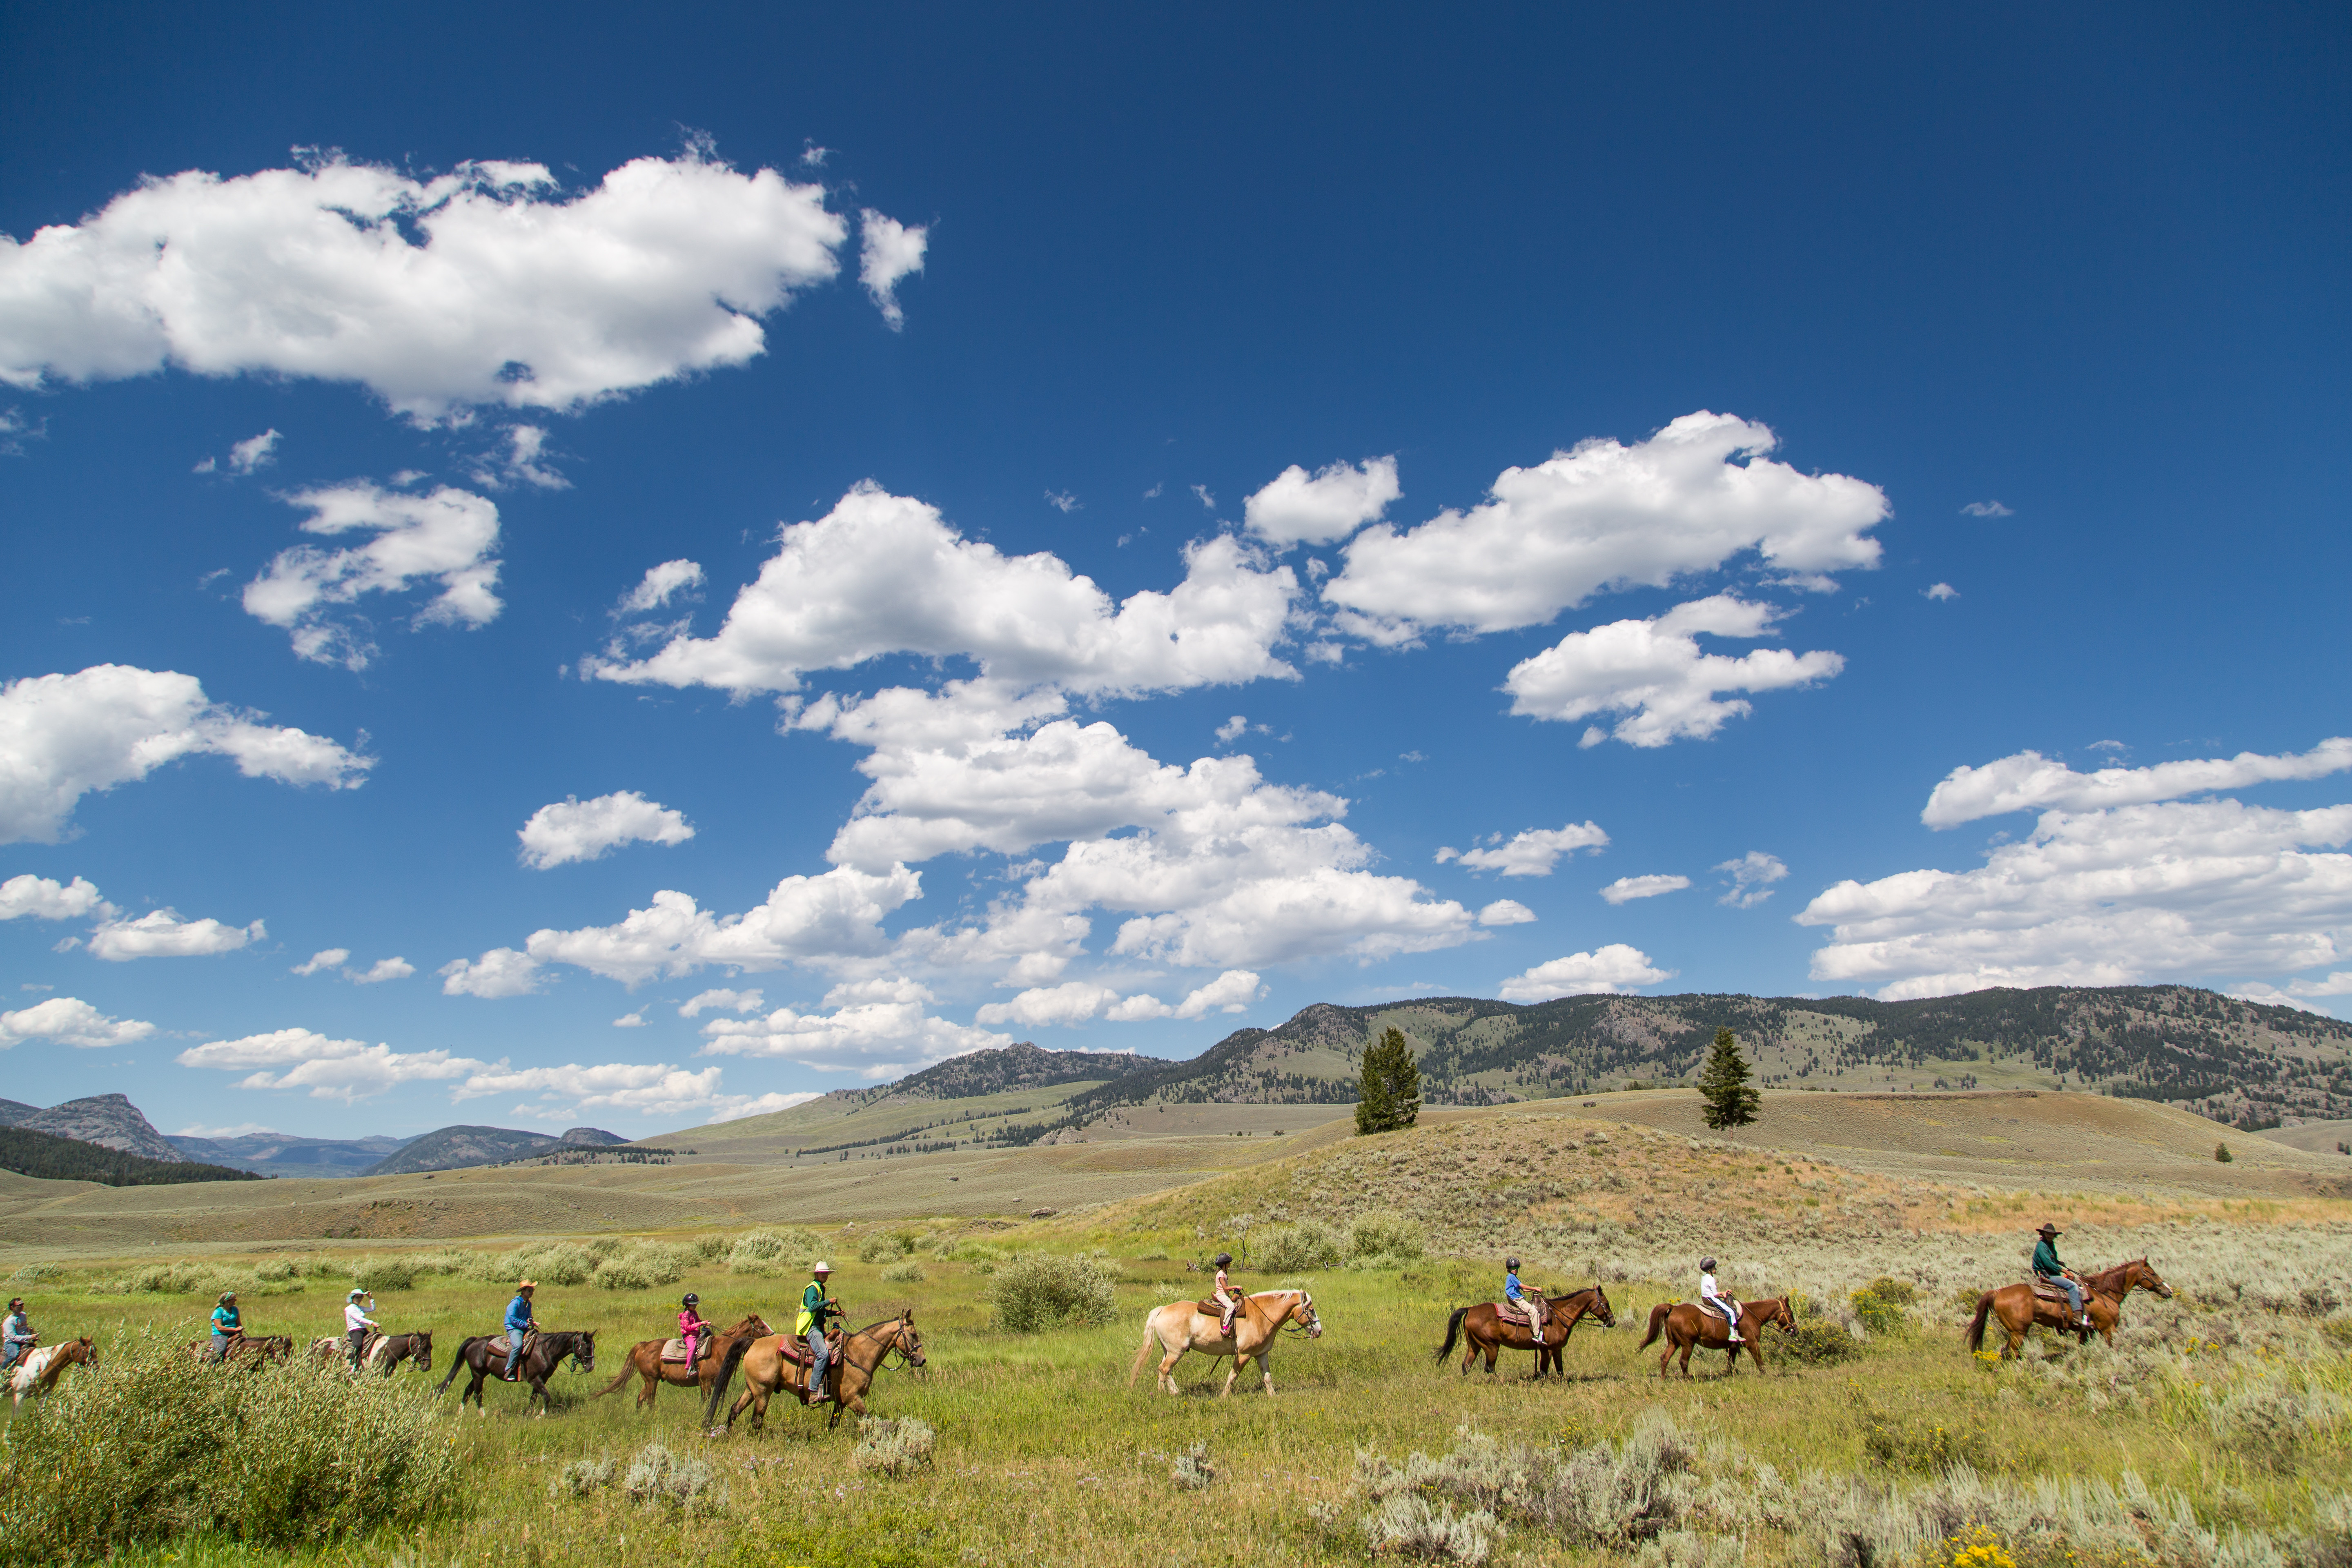 A string of horses and riders among a green, mountainous landscape